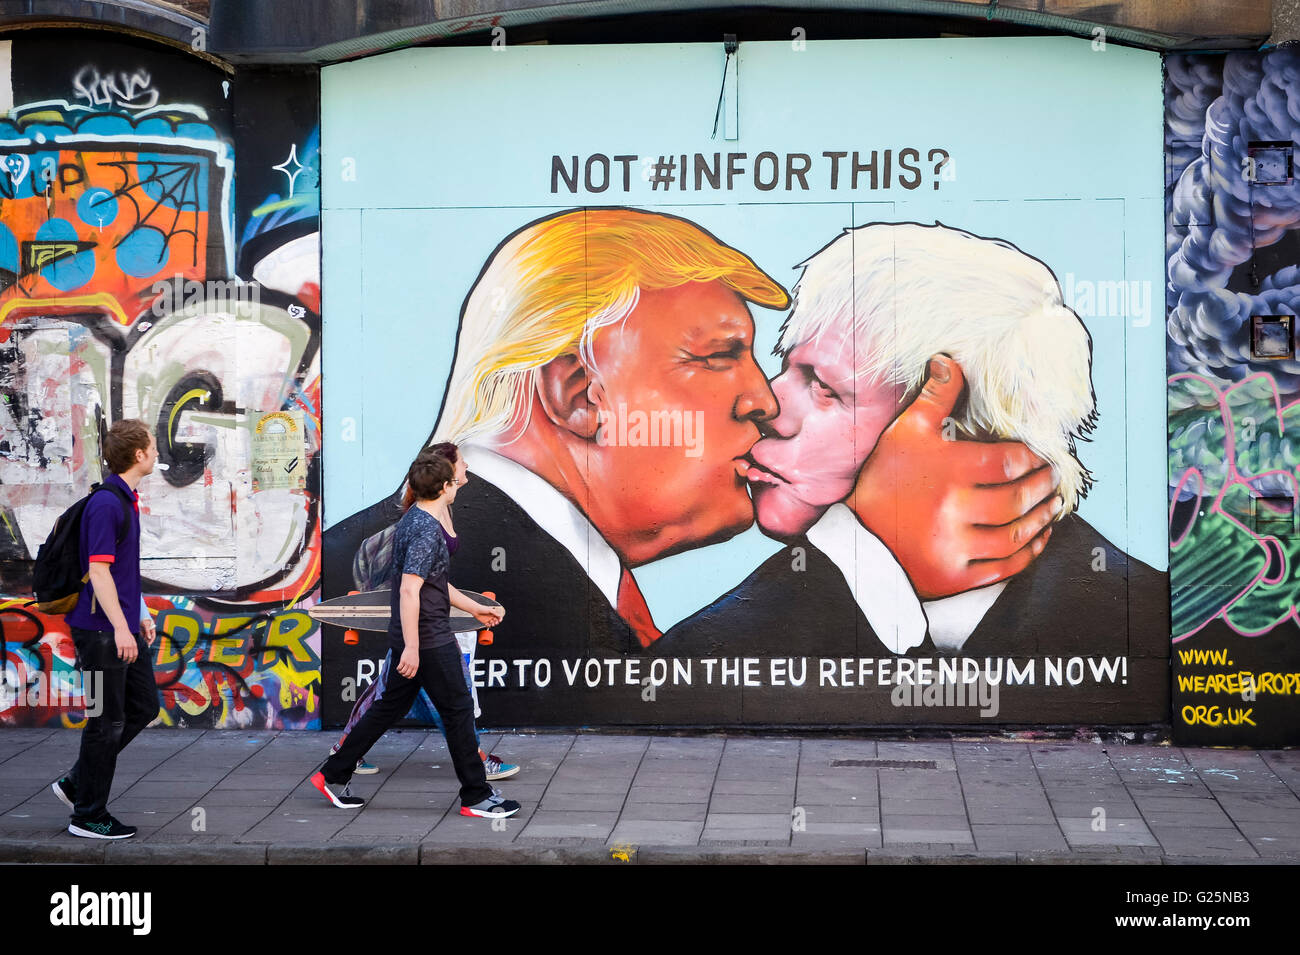 People walk past a graffiti mural of Donald Trump and Boris Johnson kissing, which is sprayed on a disused building in the Stokes Croft area of Bristol. Stock Photo